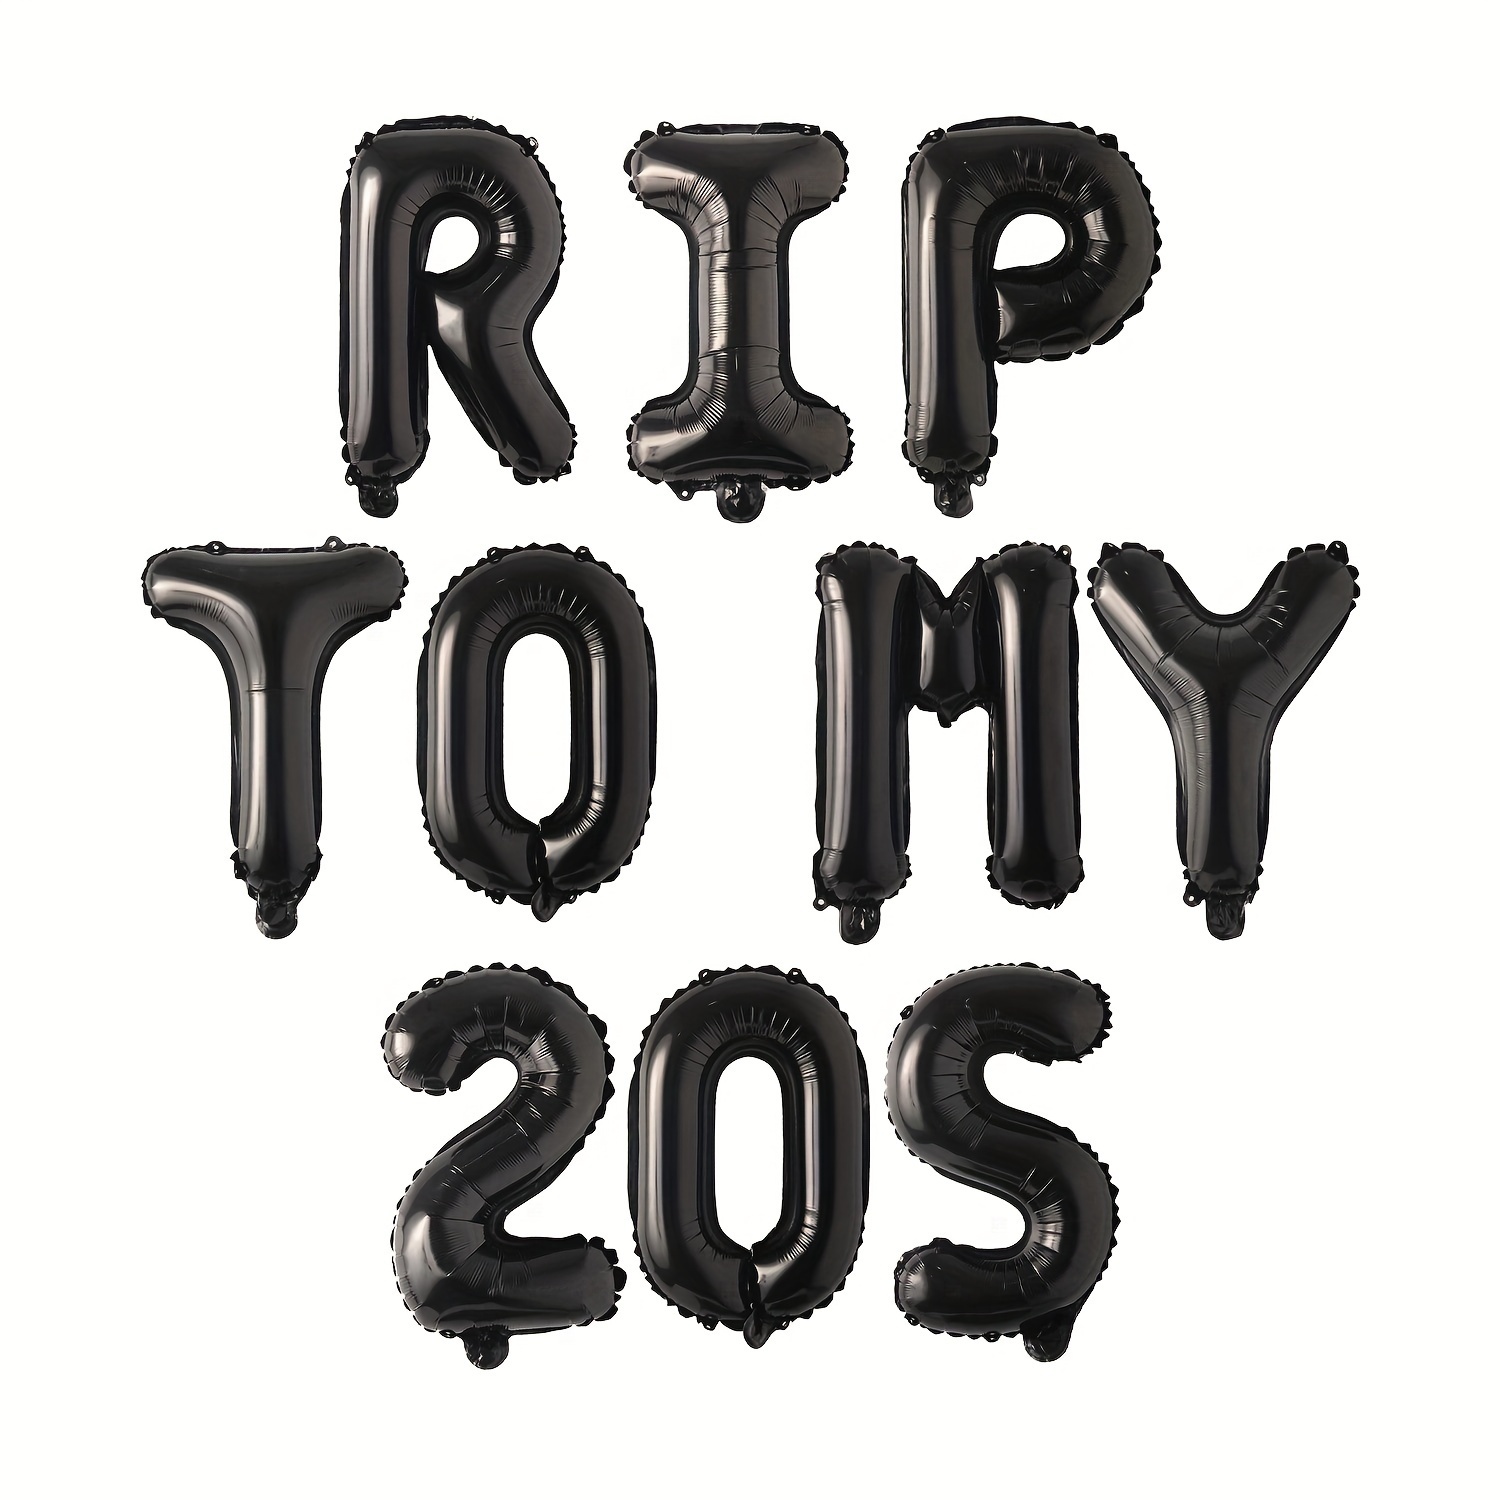 

10pcs, 30th Birthday Party Decoration Supplies, Rip To My 20s Balloons Banner, Gothic Themes 30th Birthday Party Decoration Supplies, Home Decor